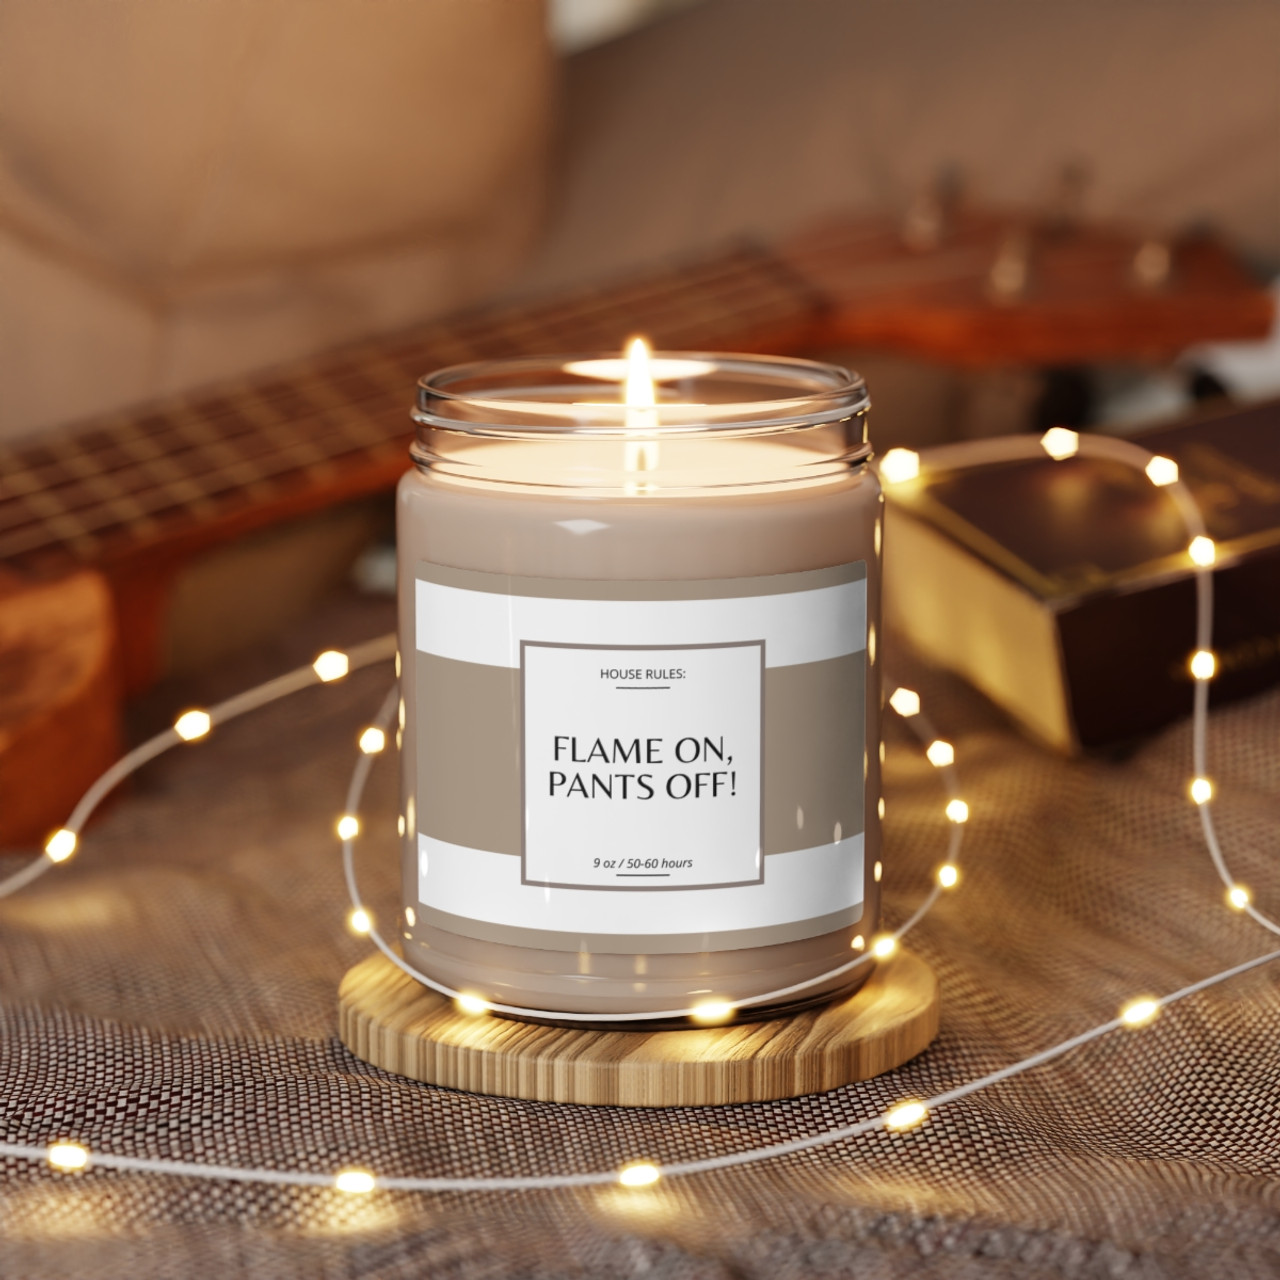 Flame On, Pants Off - Scented Soy Candle, 9oz